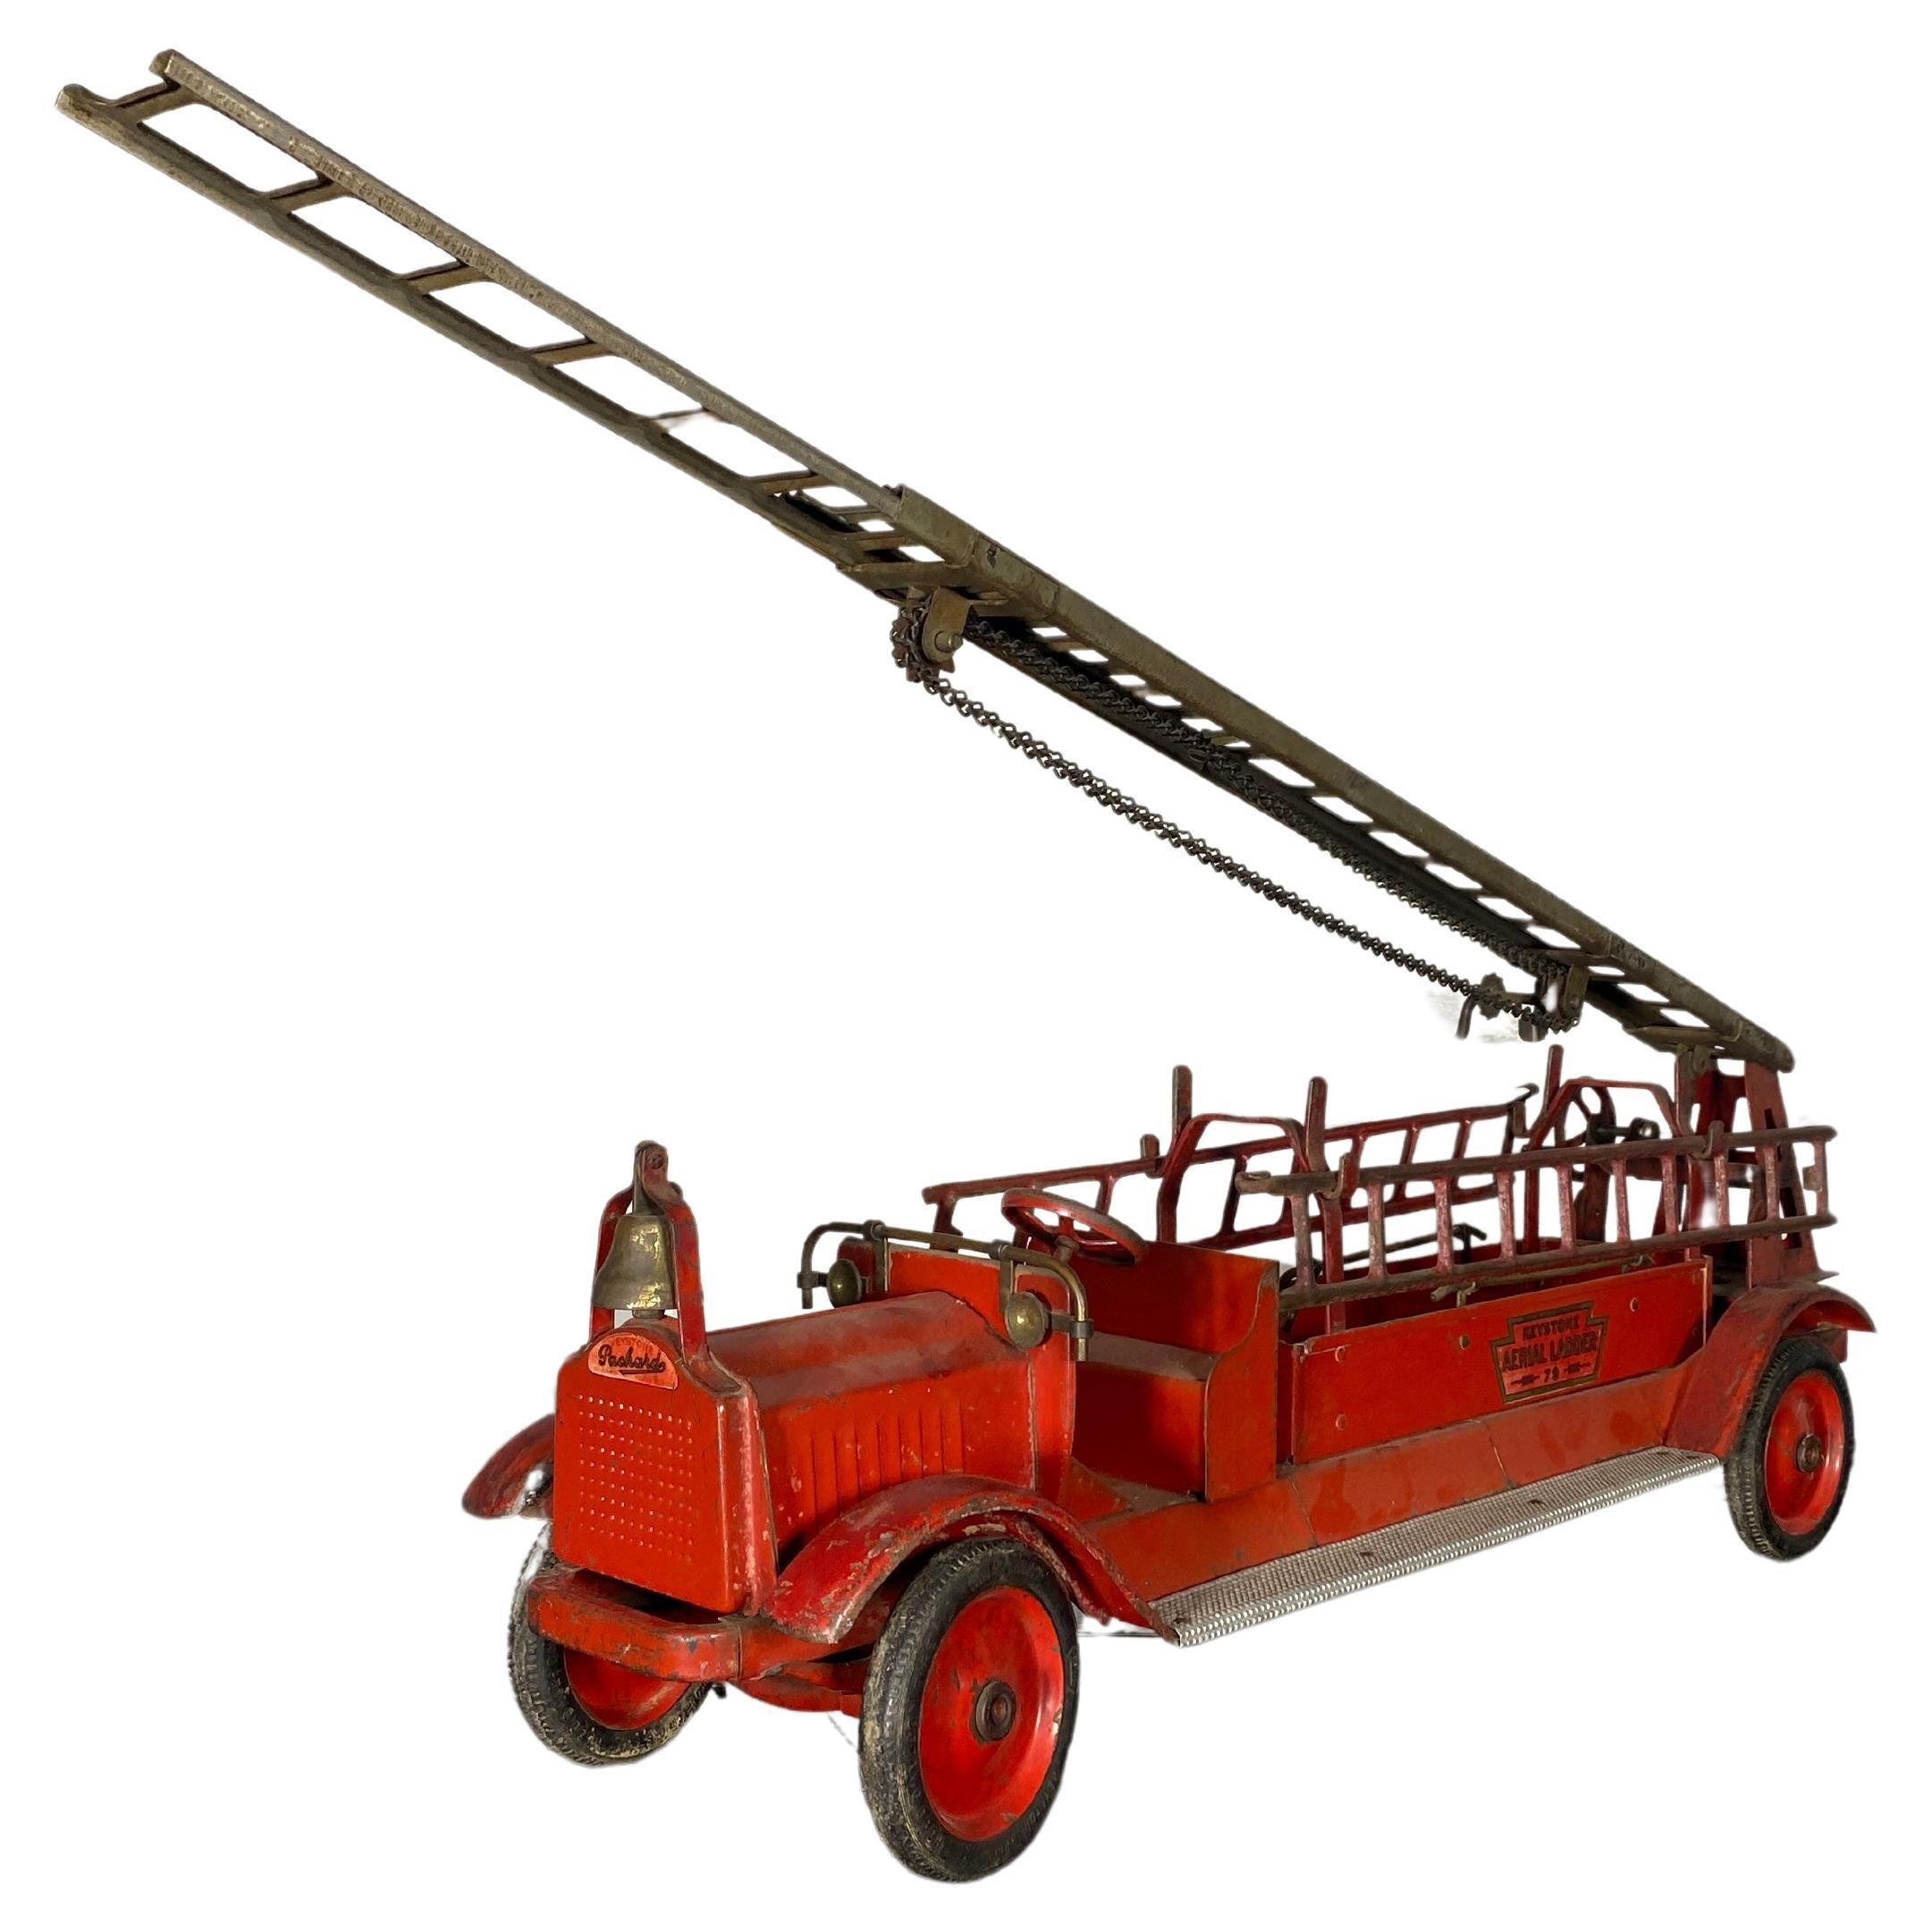 1920S / 30S kEYSTONE Pressed steel Fire Truck Ariel Ladder 79,  Packard.. Fully functional. Retains its removable ladders,, All labels in tact. Wonderful original condition..12 1/2 in. high x 8 1/2 in. wide x 30 1/2 in. deep